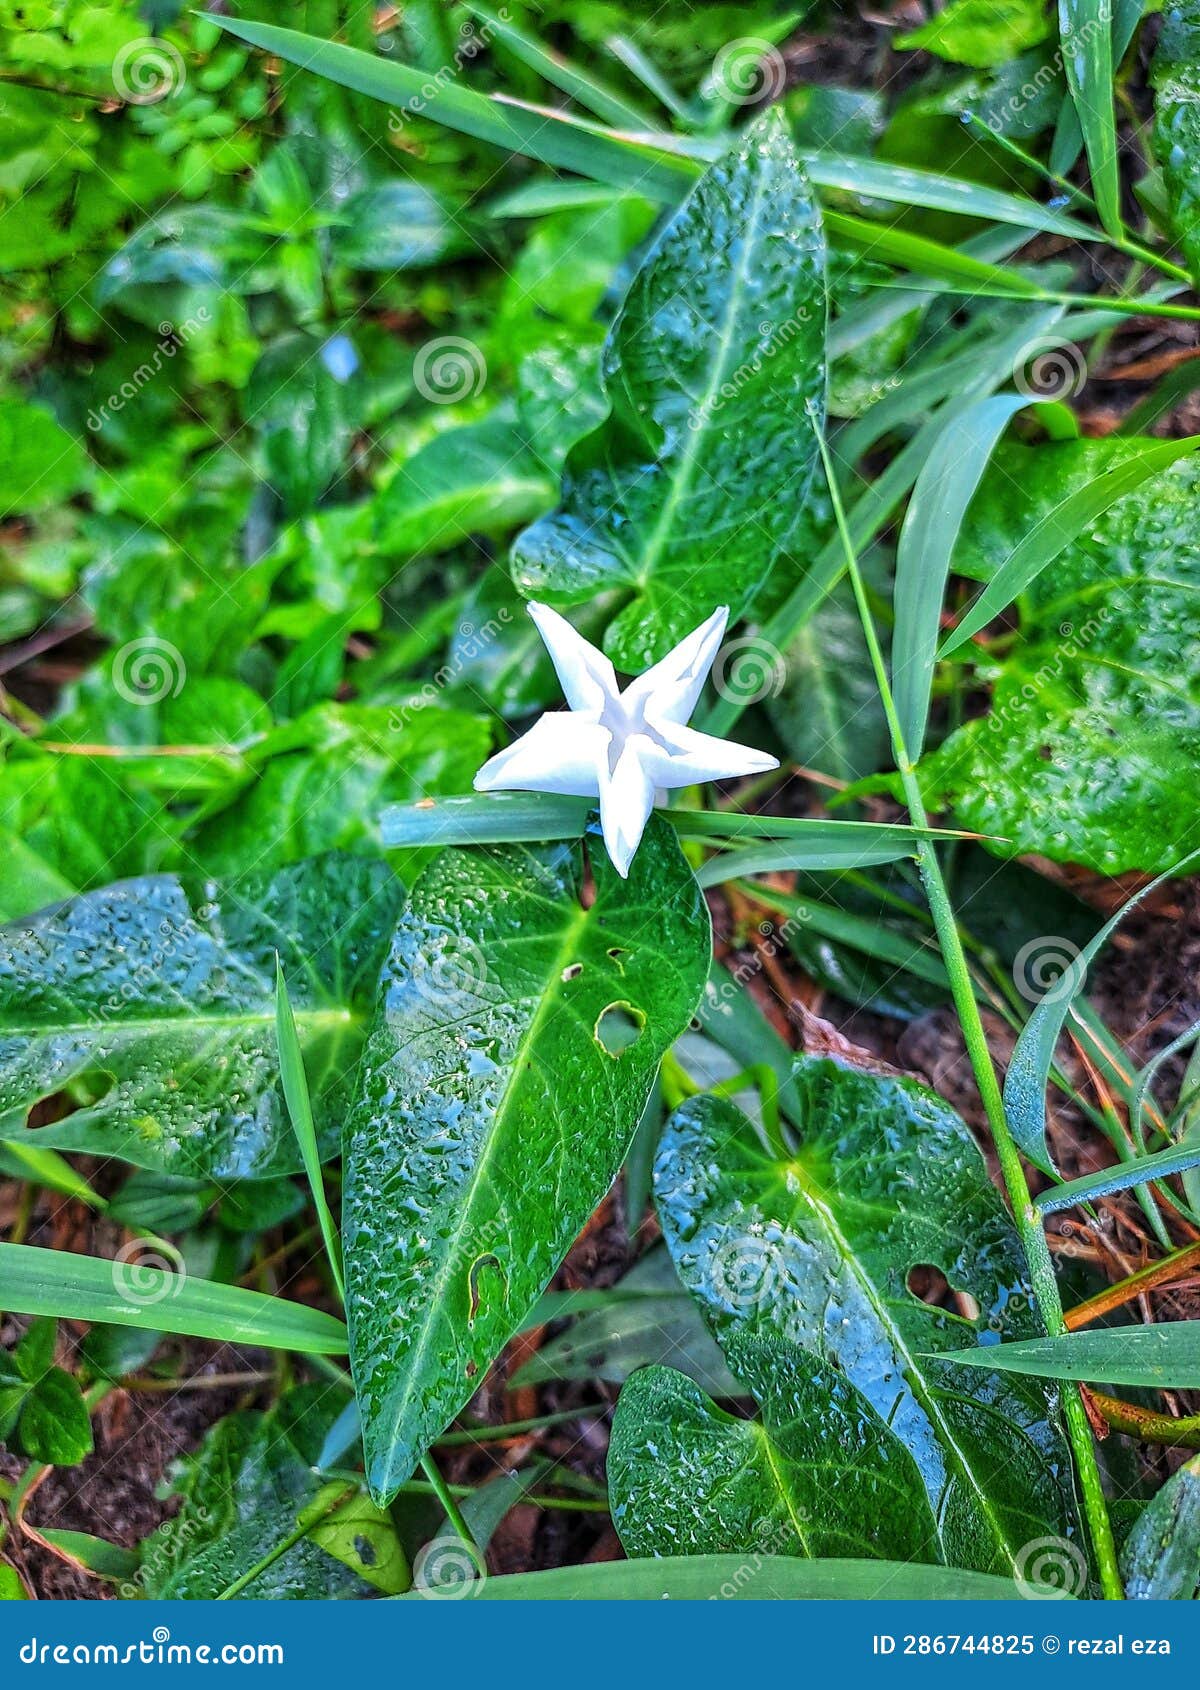 the wild green spinach with white flower like star on the ground lovley white star